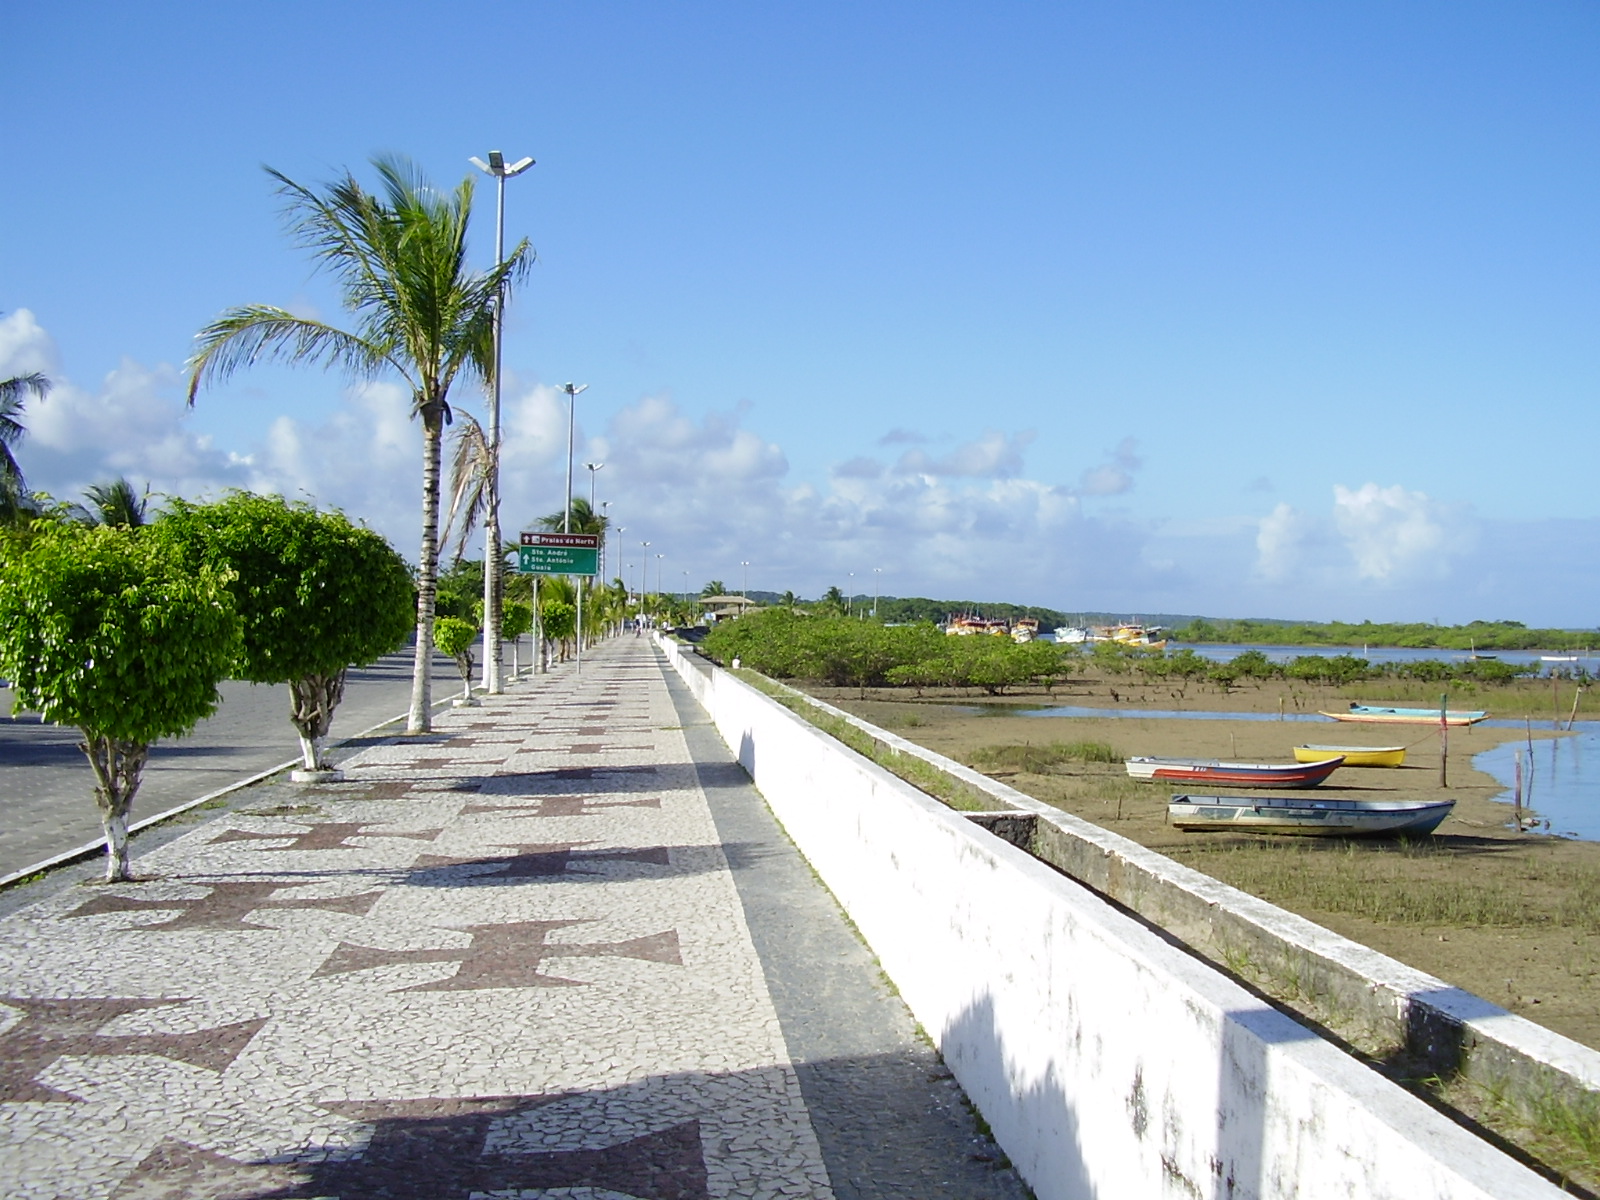 the small harbour walkway, leading to the main harbour and to the bus station